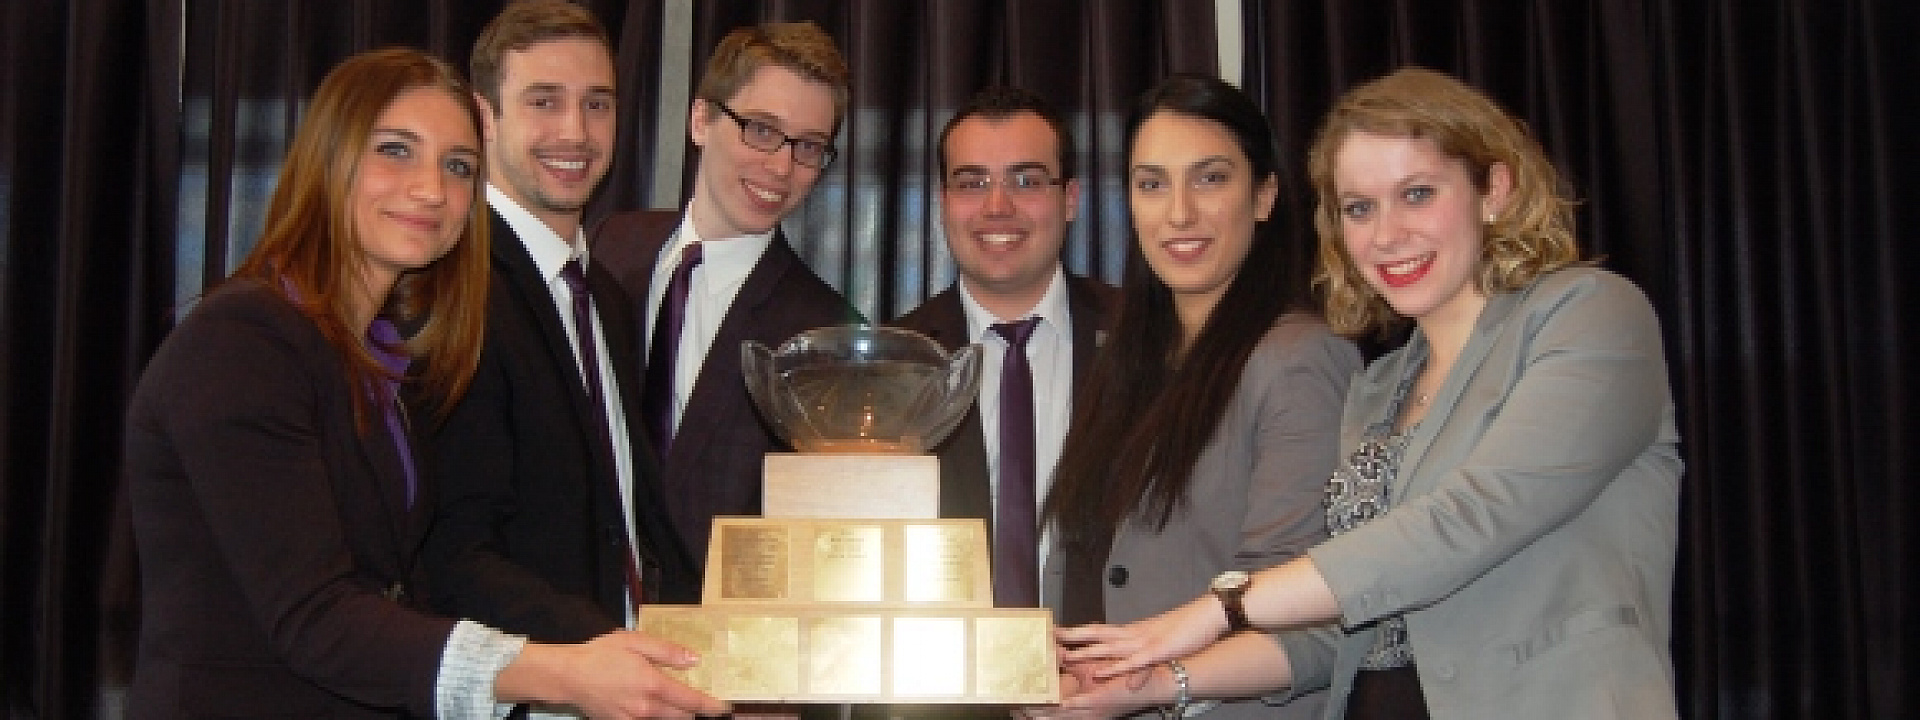 winning team holding the Michel Cloutier Trophee